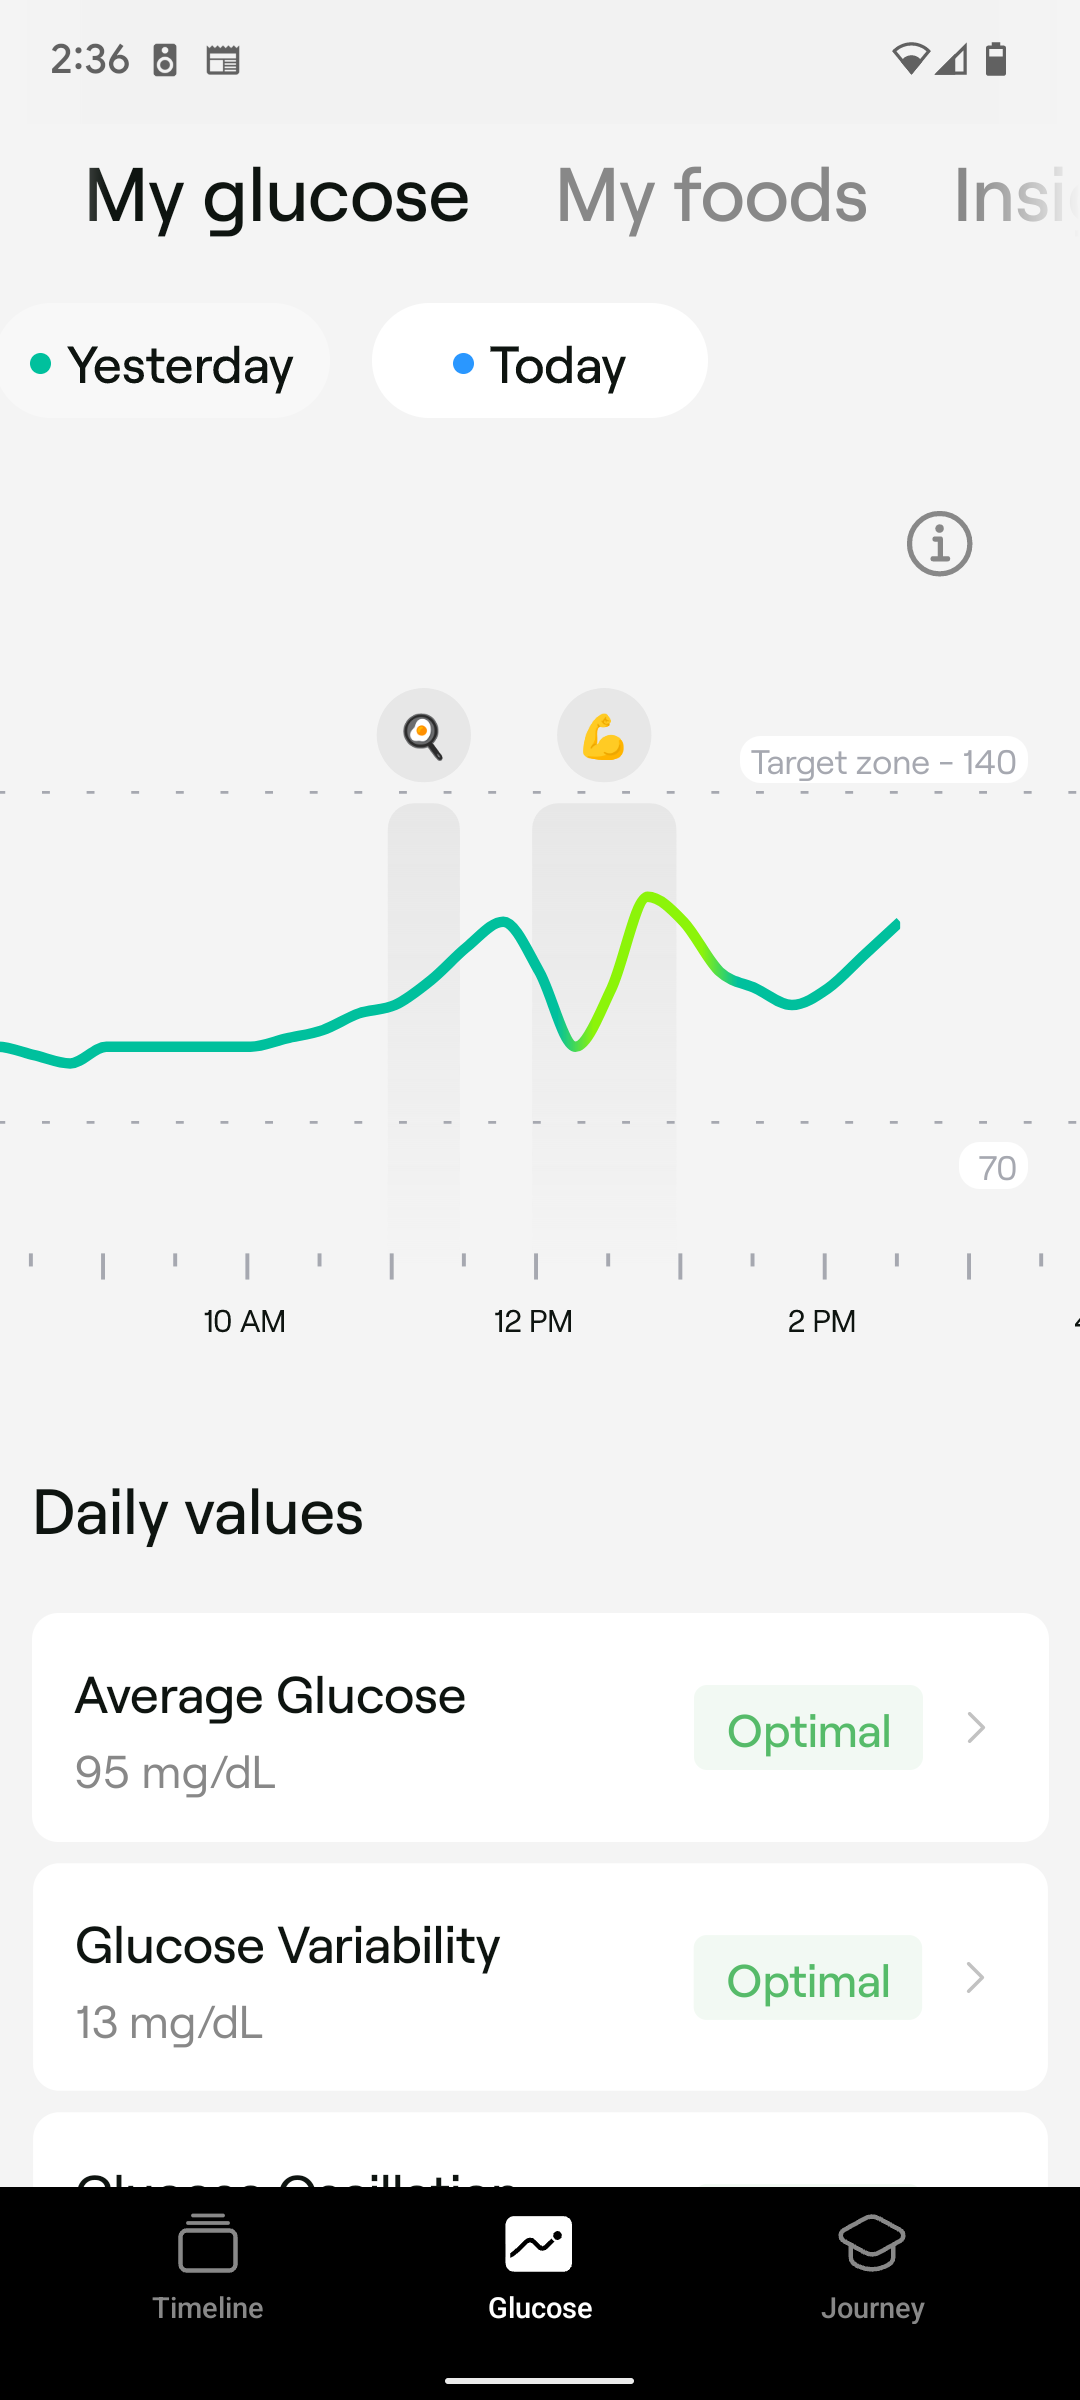 Top 8 Weight Tracker Apps to Help You Get Fit in 2023 - Nutrisense Journal